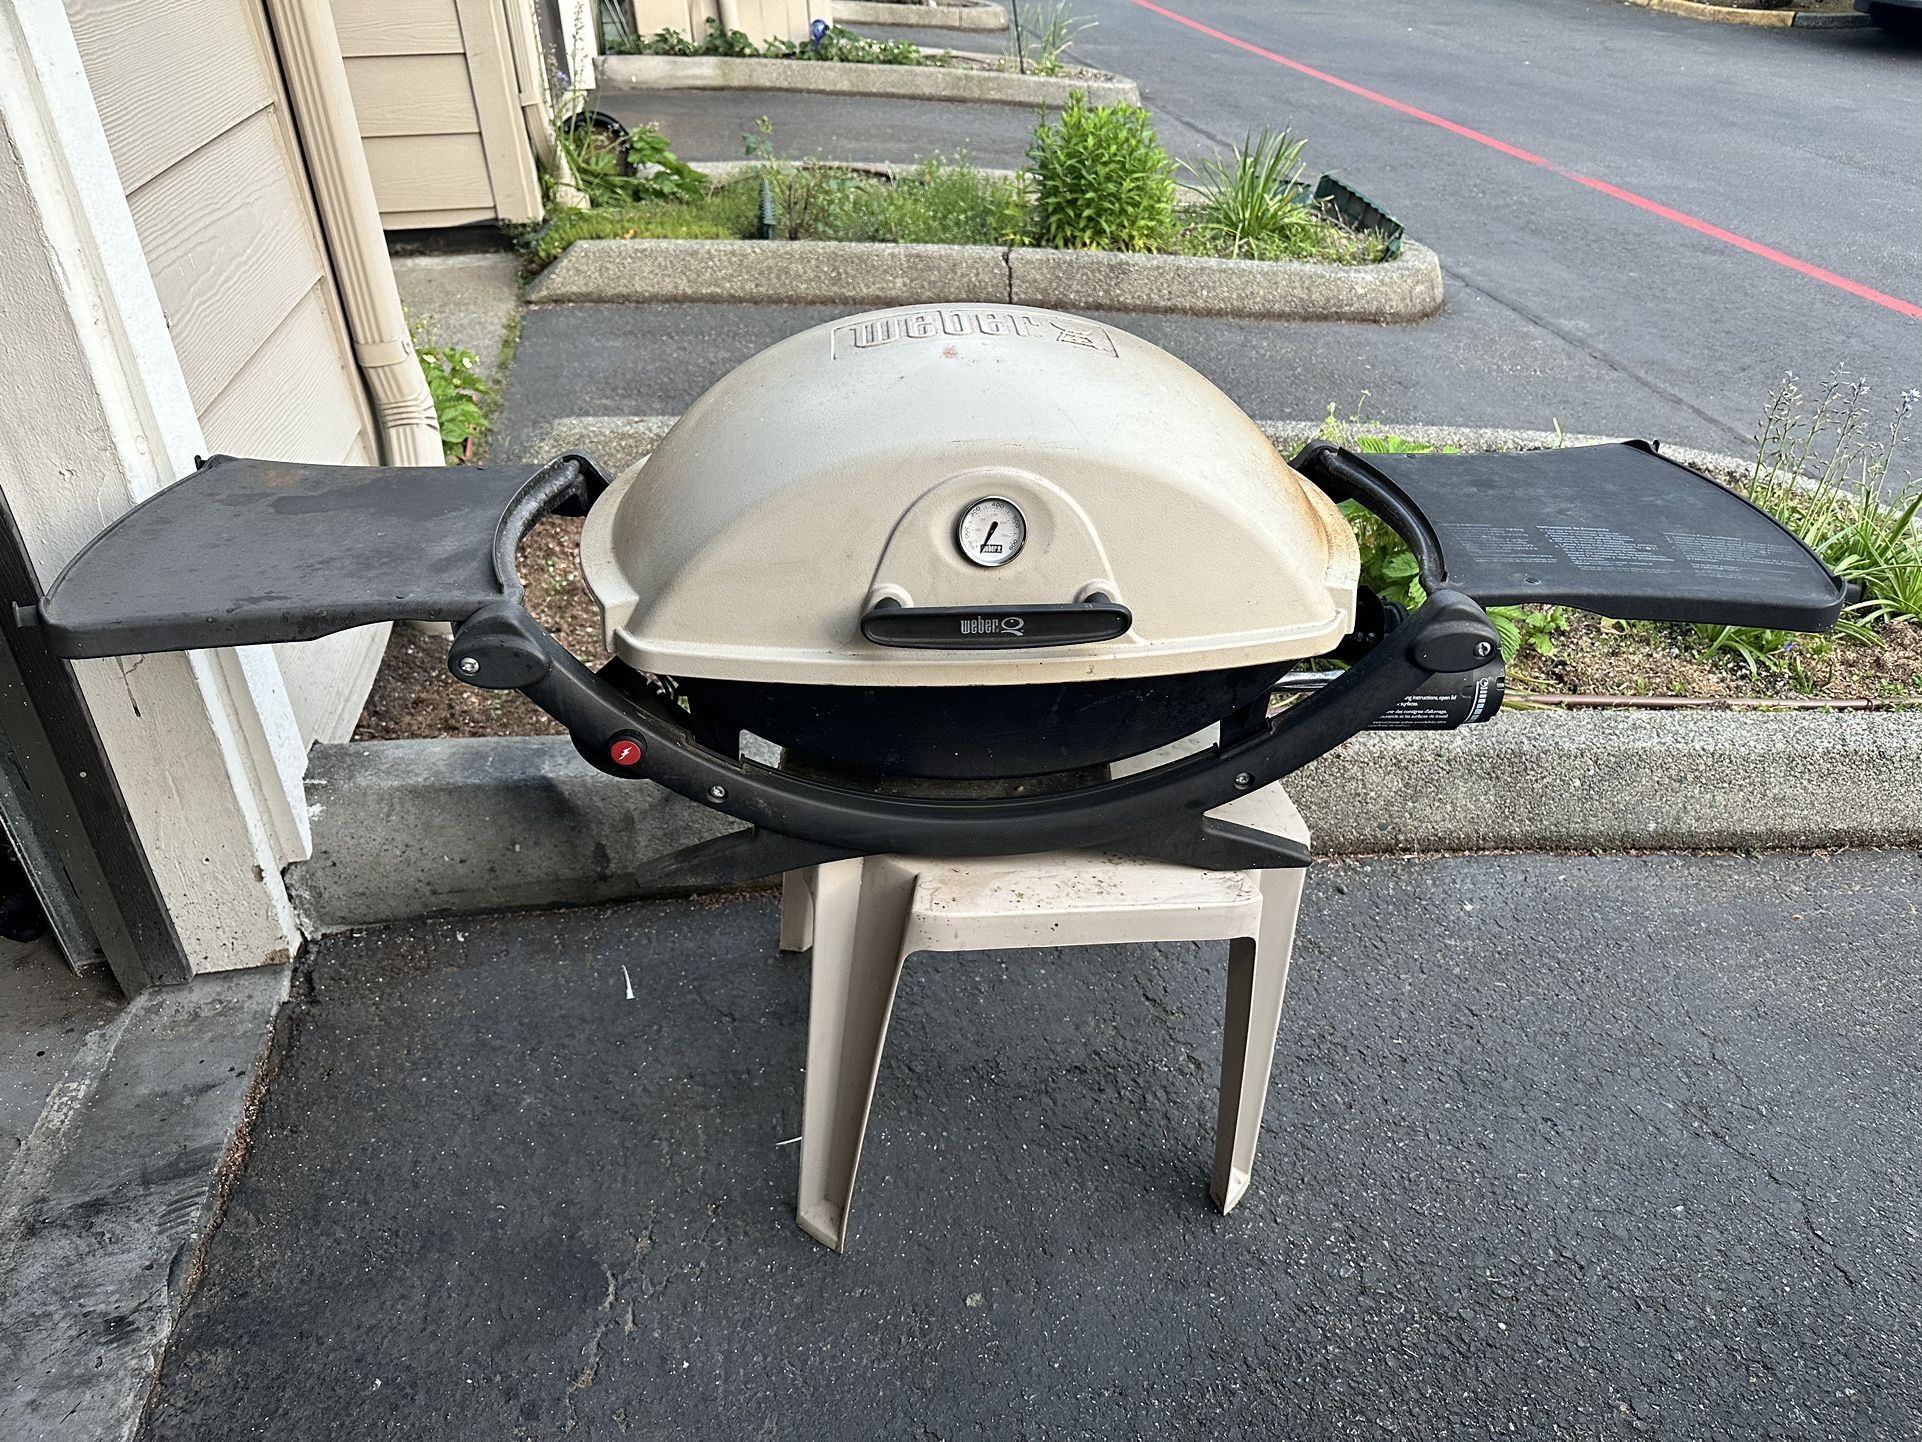 Weber Gas Grill With Propane Tank 